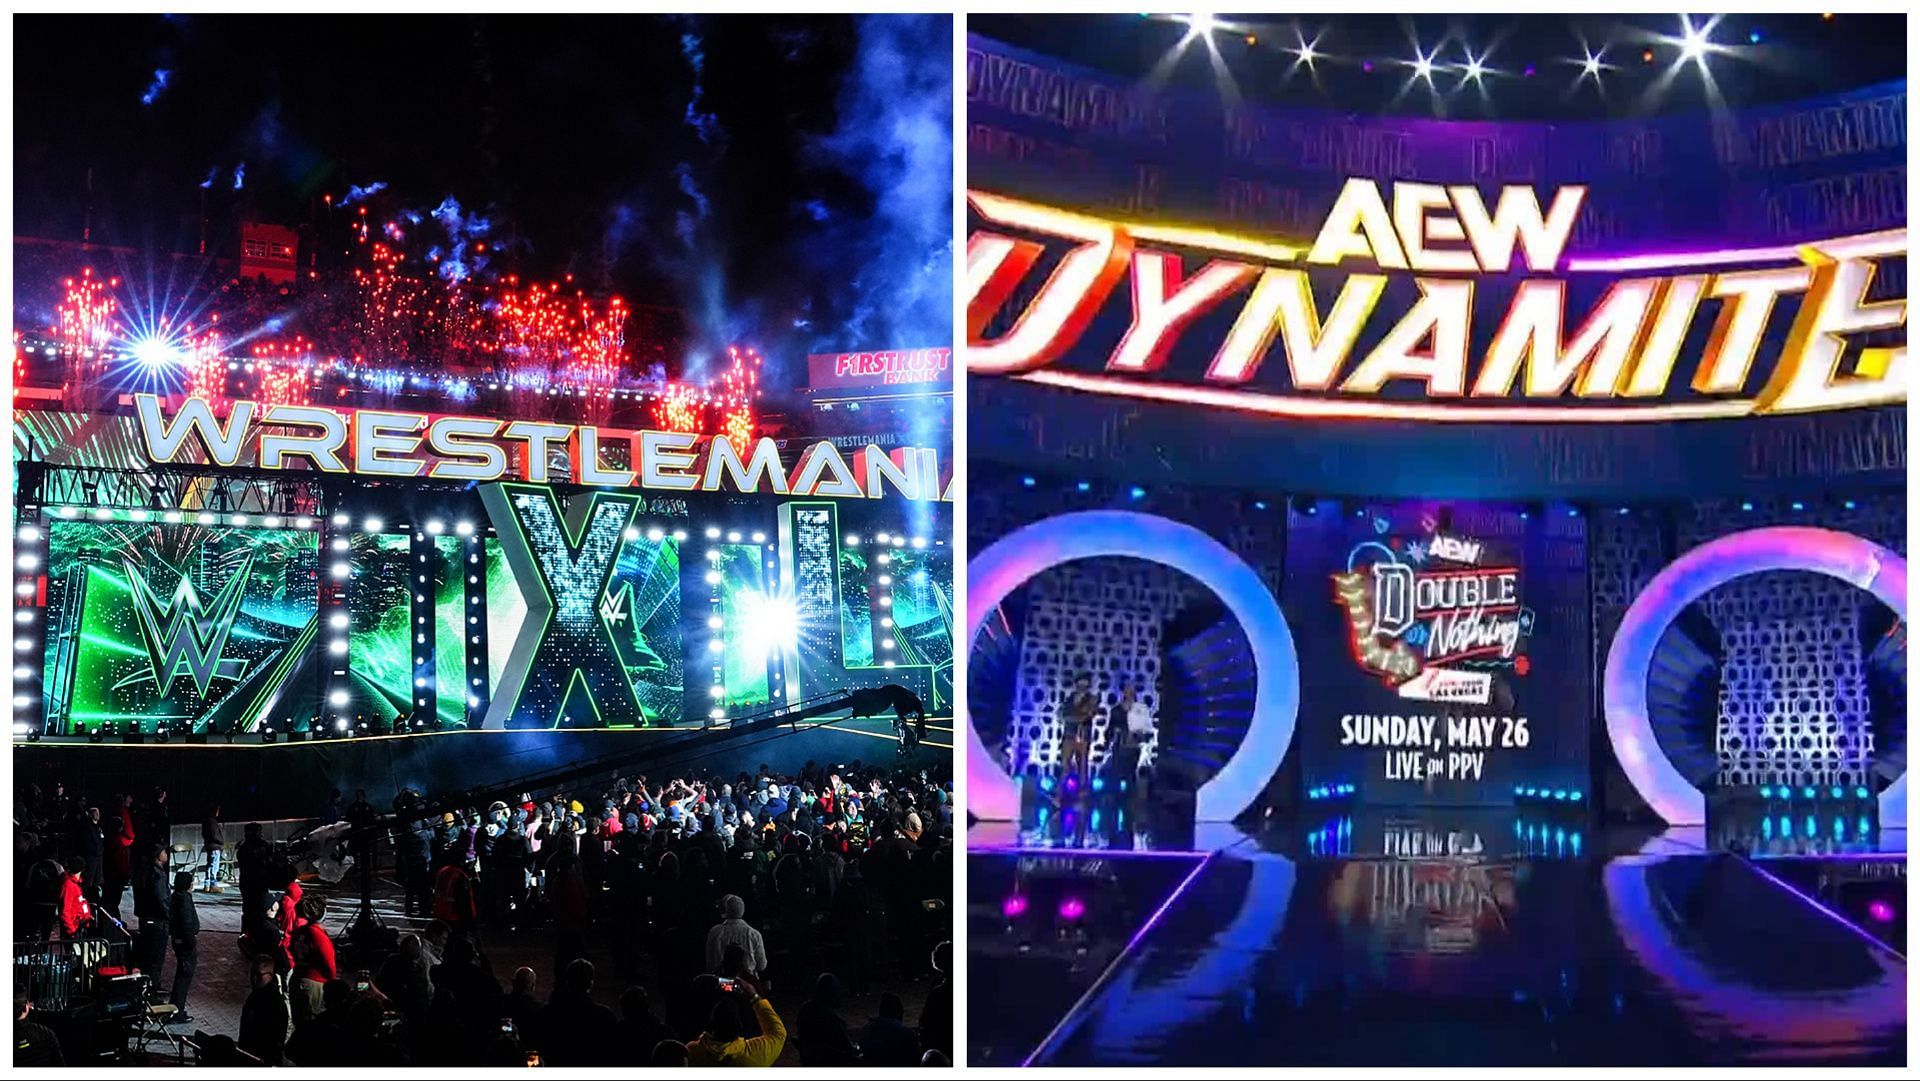 The stage at WWE WrestleMania XL, the stage at AEW Dynamite